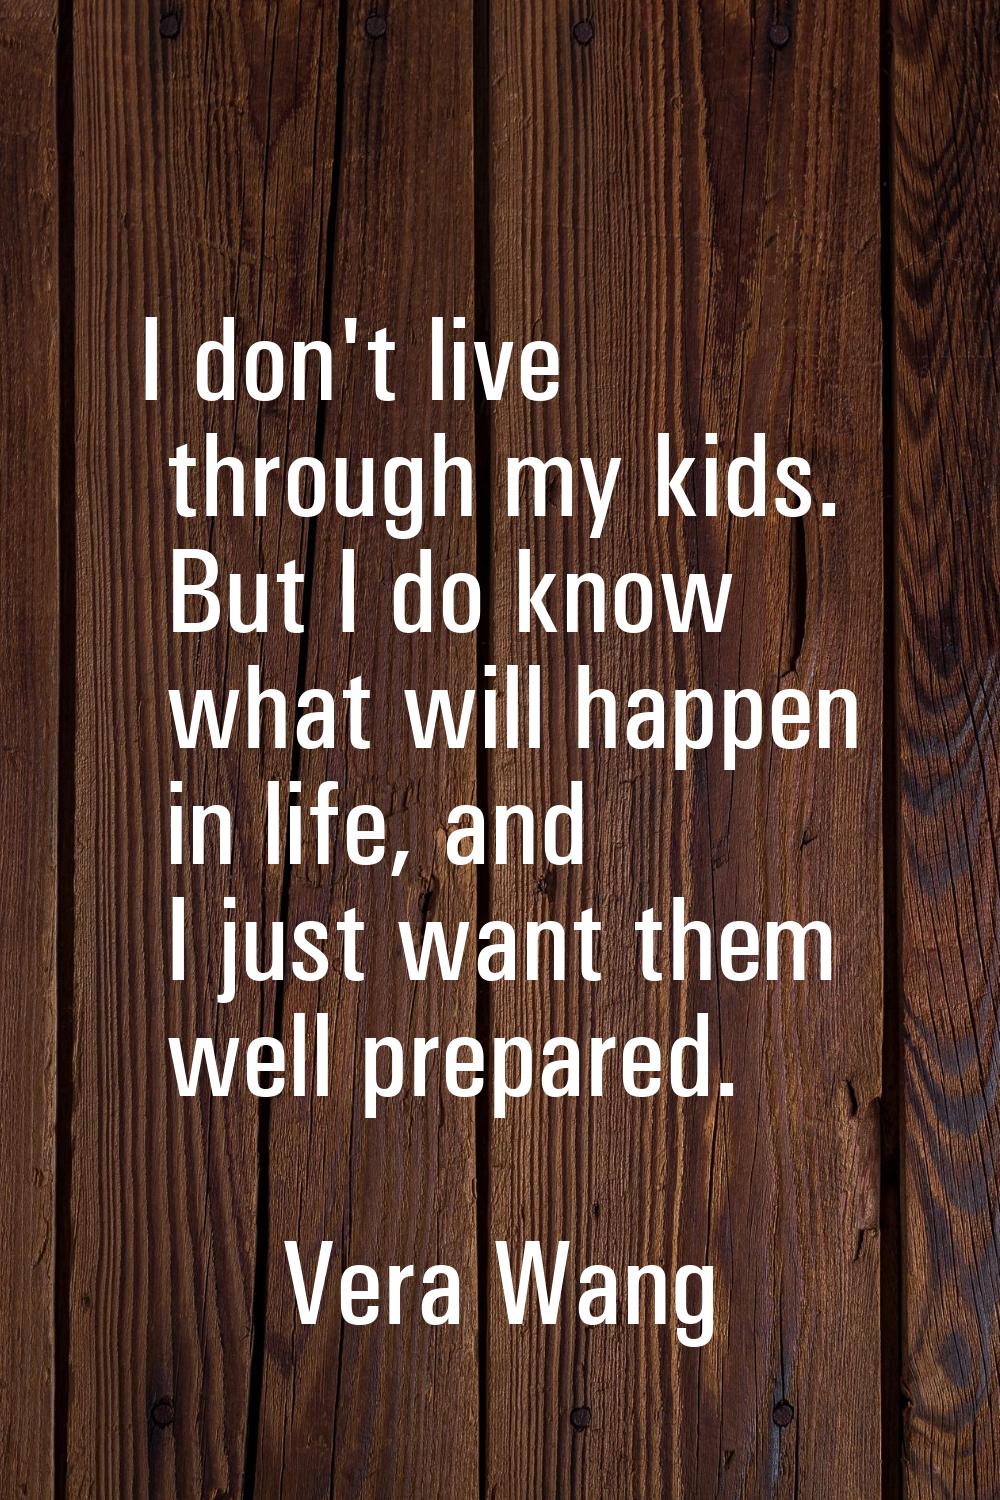 I don't live through my kids. But I do know what will happen in life, and I just want them well pre